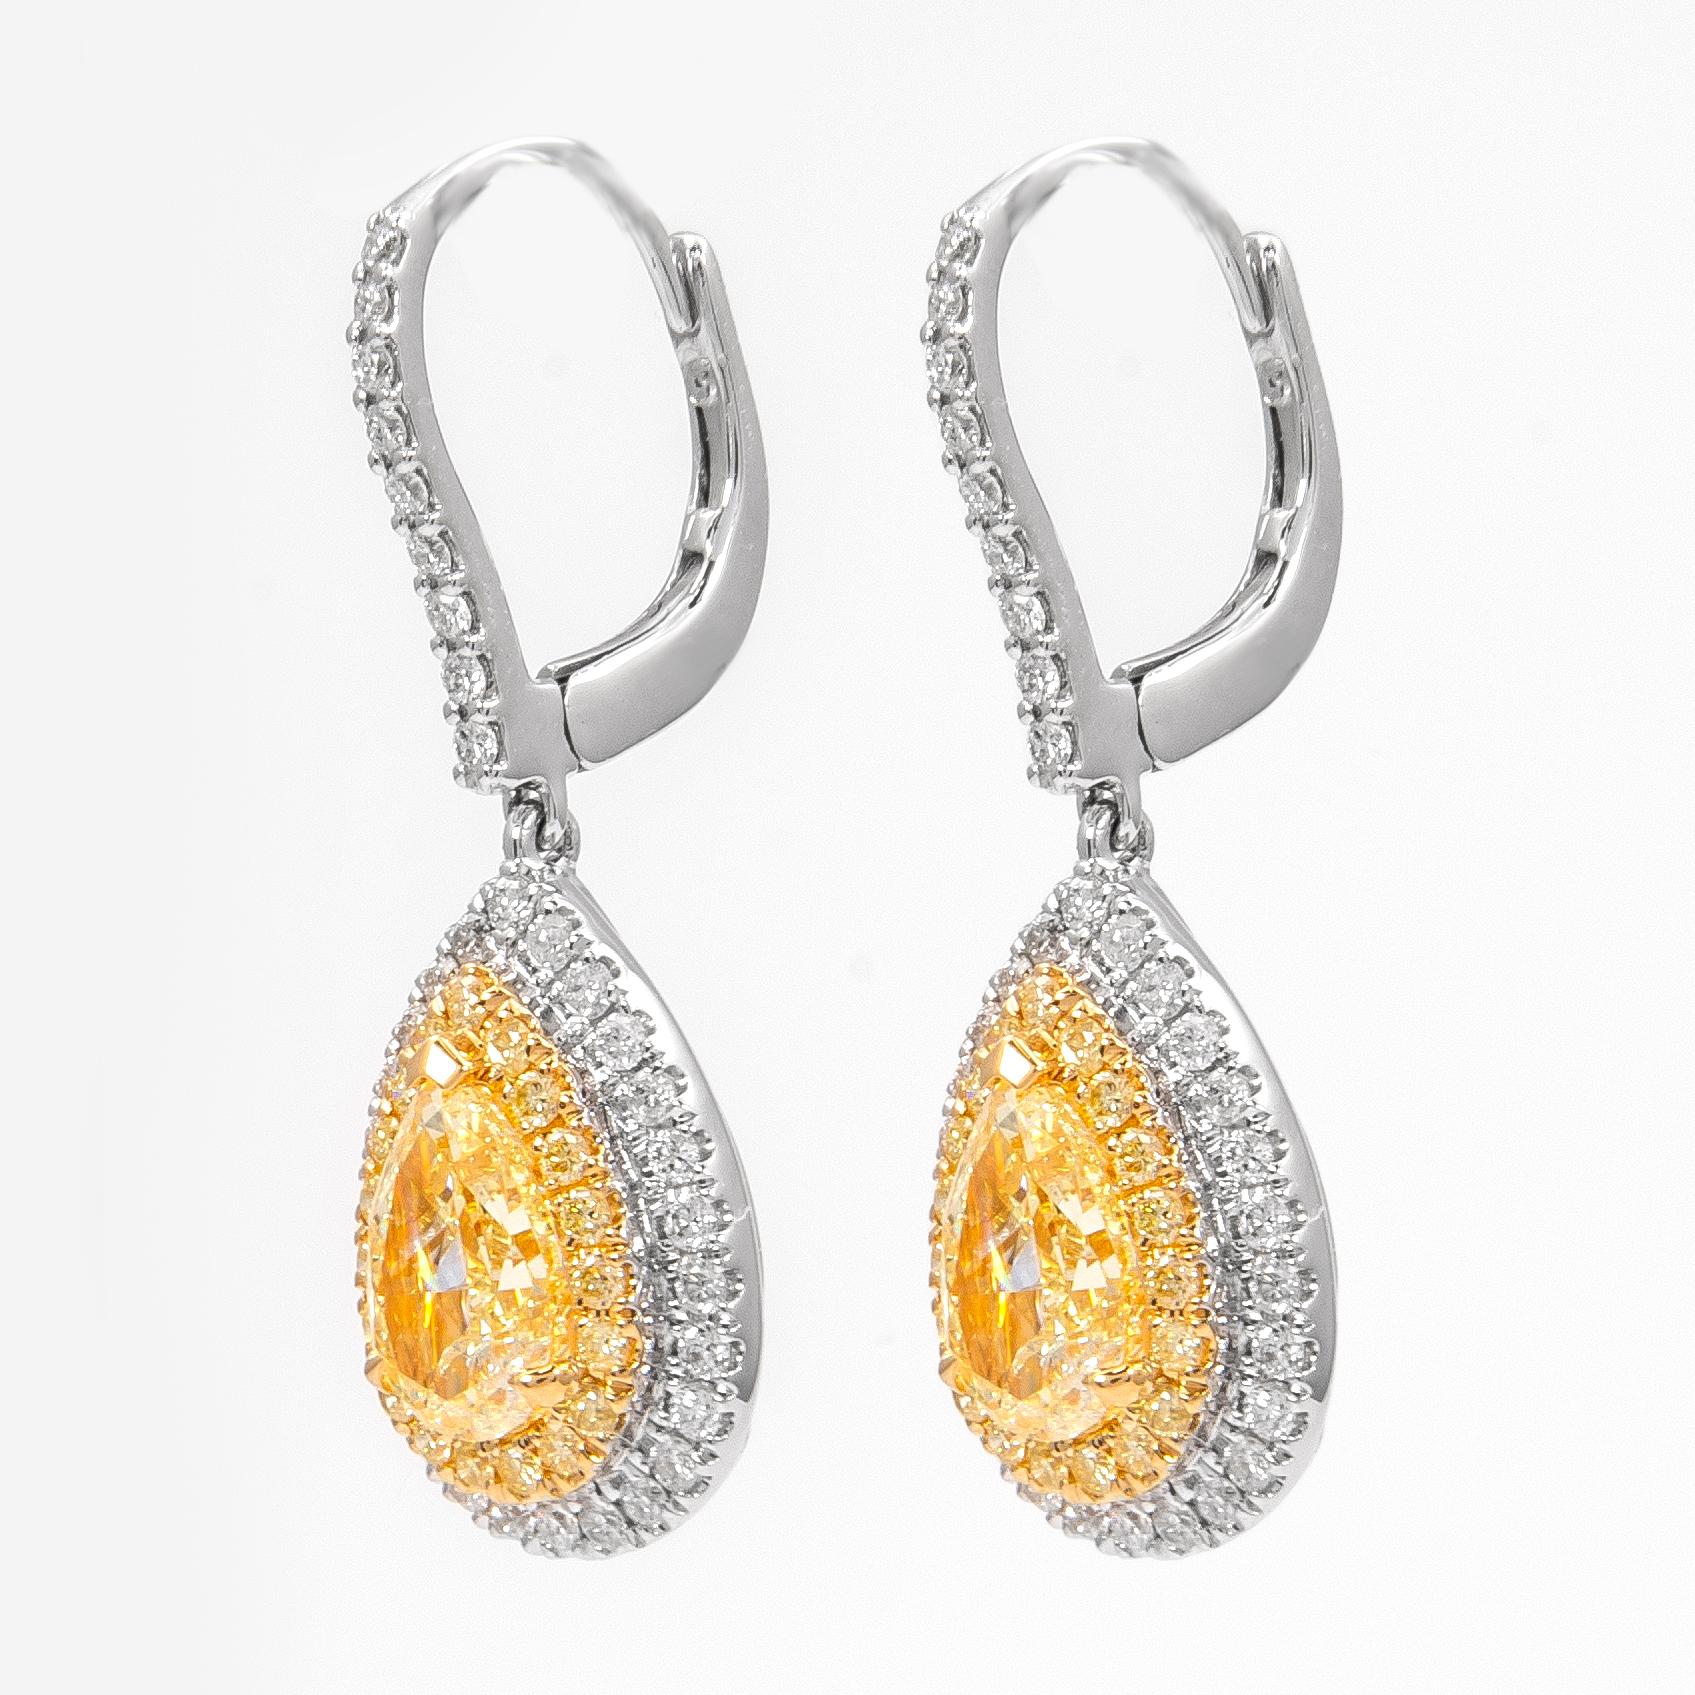 Stunning yellow diamond and diamond halo drop earrings, by Alexander Beverly Hills.
2.74 carats total diamond weight.
2 pear shape diamonds, 2.01 carats total. Approximately Fancy Light Yellow color grade and SI clarity grade. 
Complimented by 39